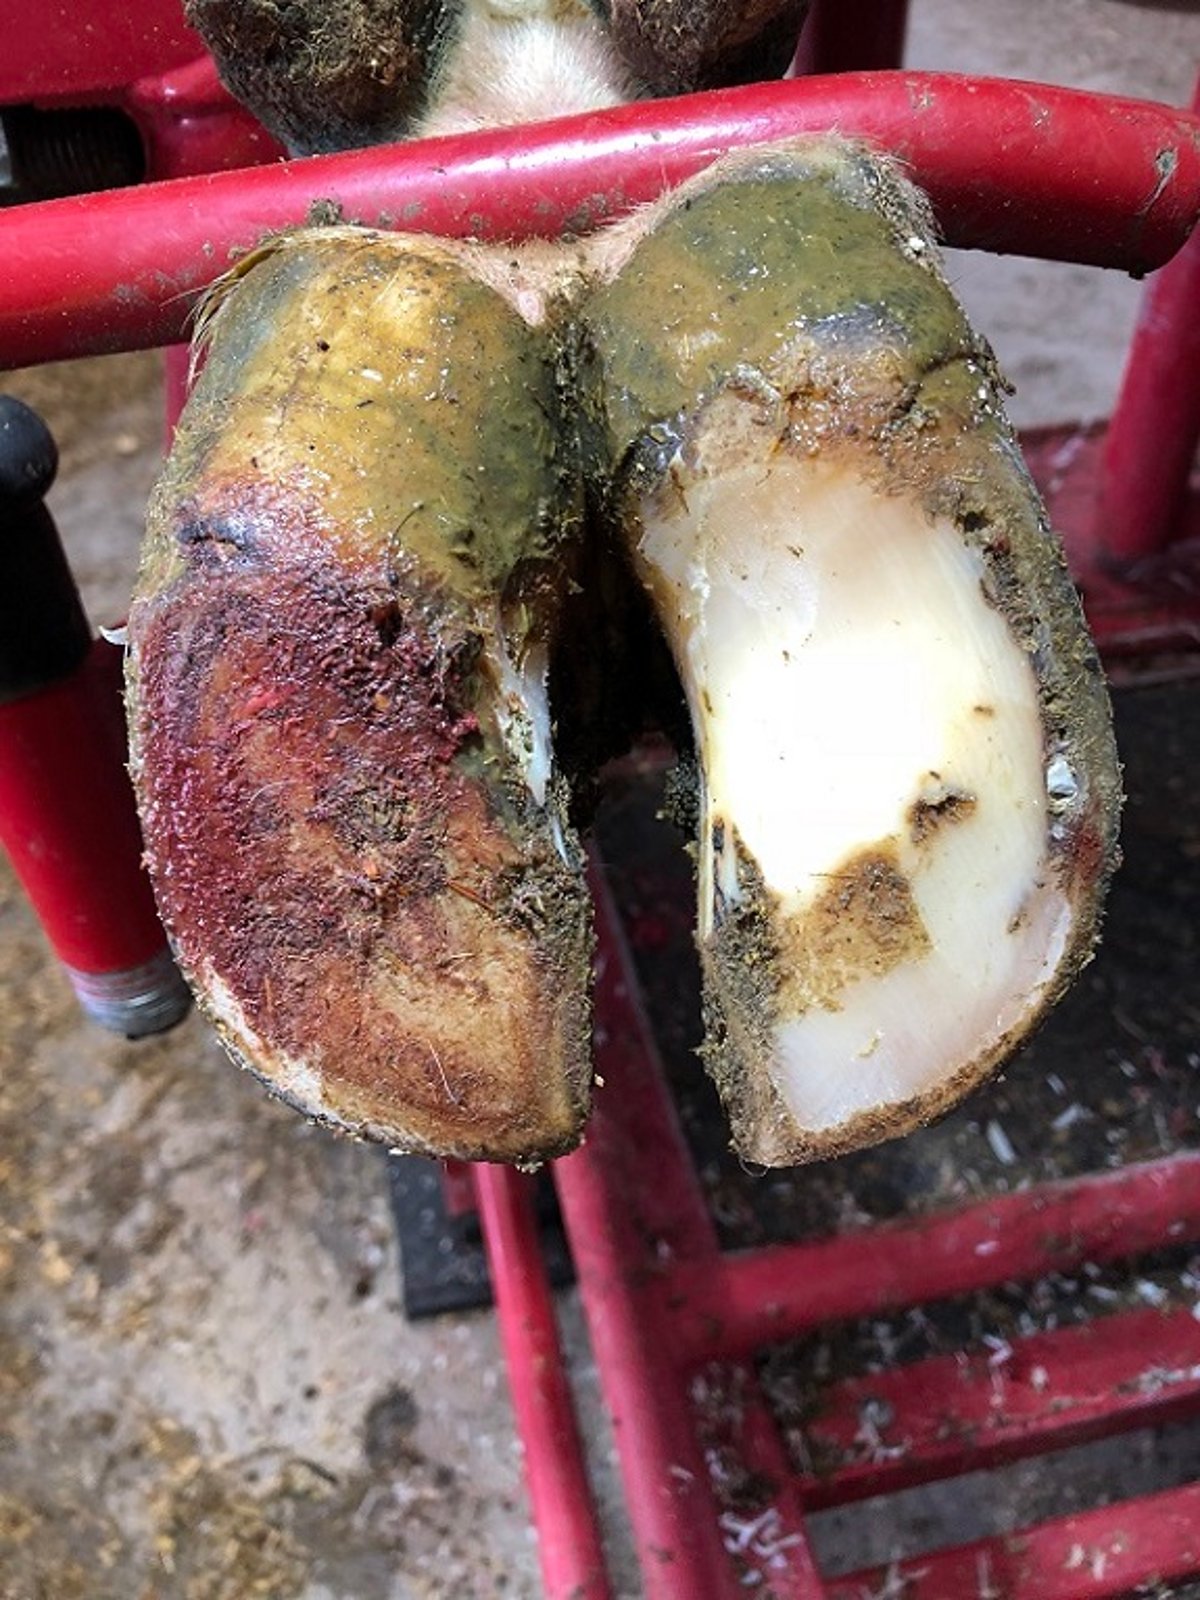 Hoof trimming to prevent sole ulcers, cow